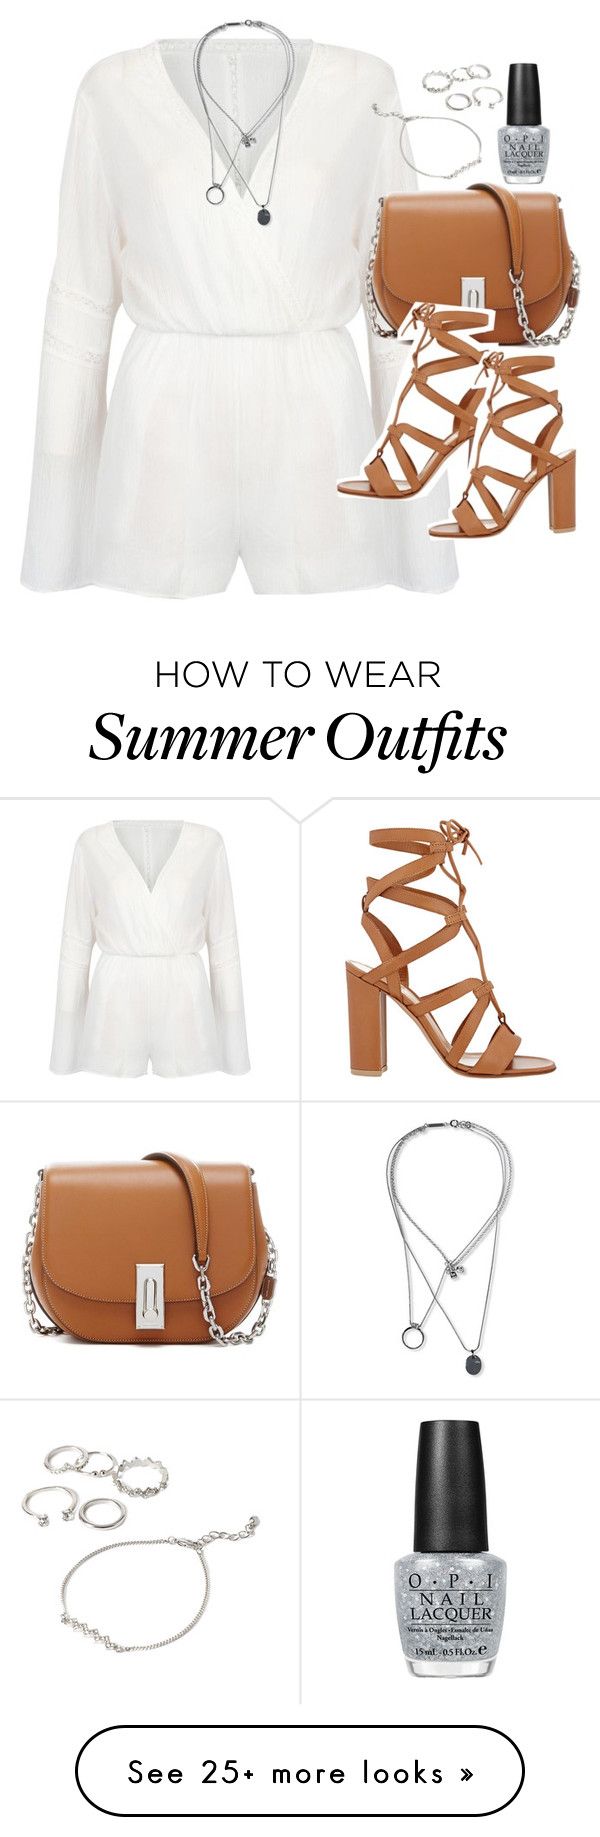 "Outfit for a casual summer date" by ferned on Polyvore featuring With...